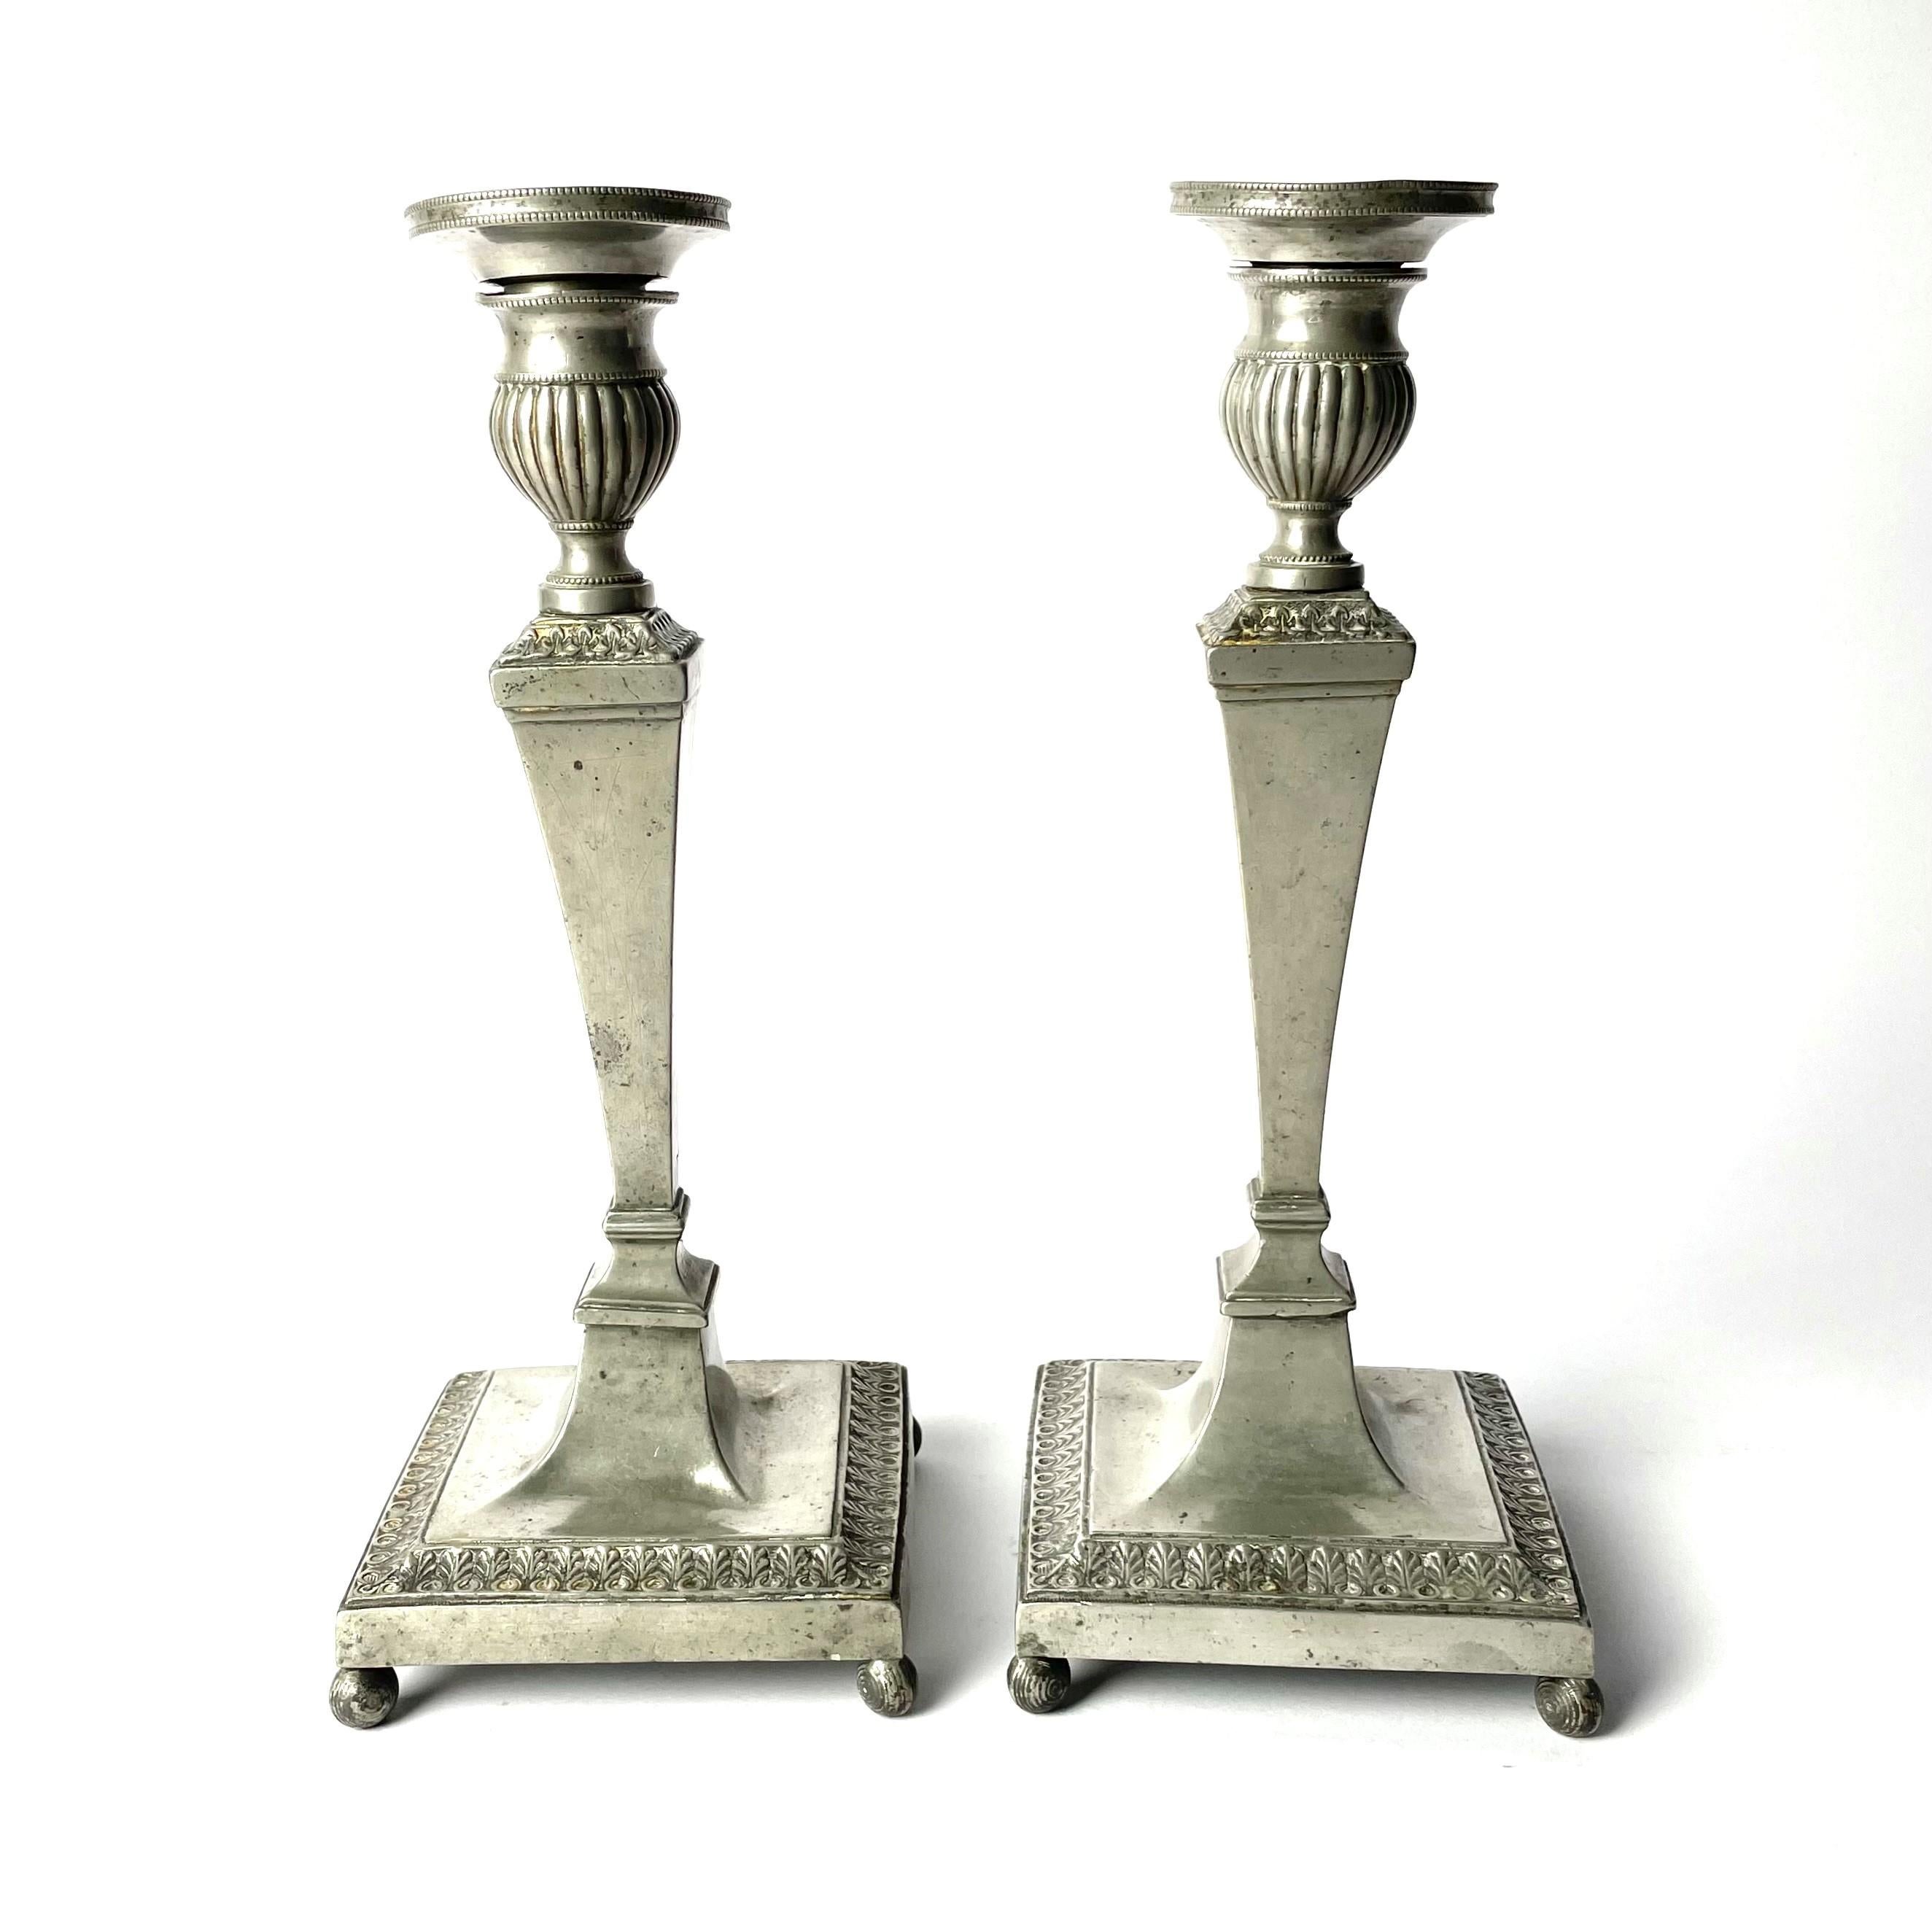 Charming pair of late Gustavian candlesticks in pewter with lovely patina from early 19th century. Signed by N.G Nordstrand. (Pewterer in 1801 - 1817 in Lund, Sweden)
Made of the fragile material pewter, these candlesticks are in good condition